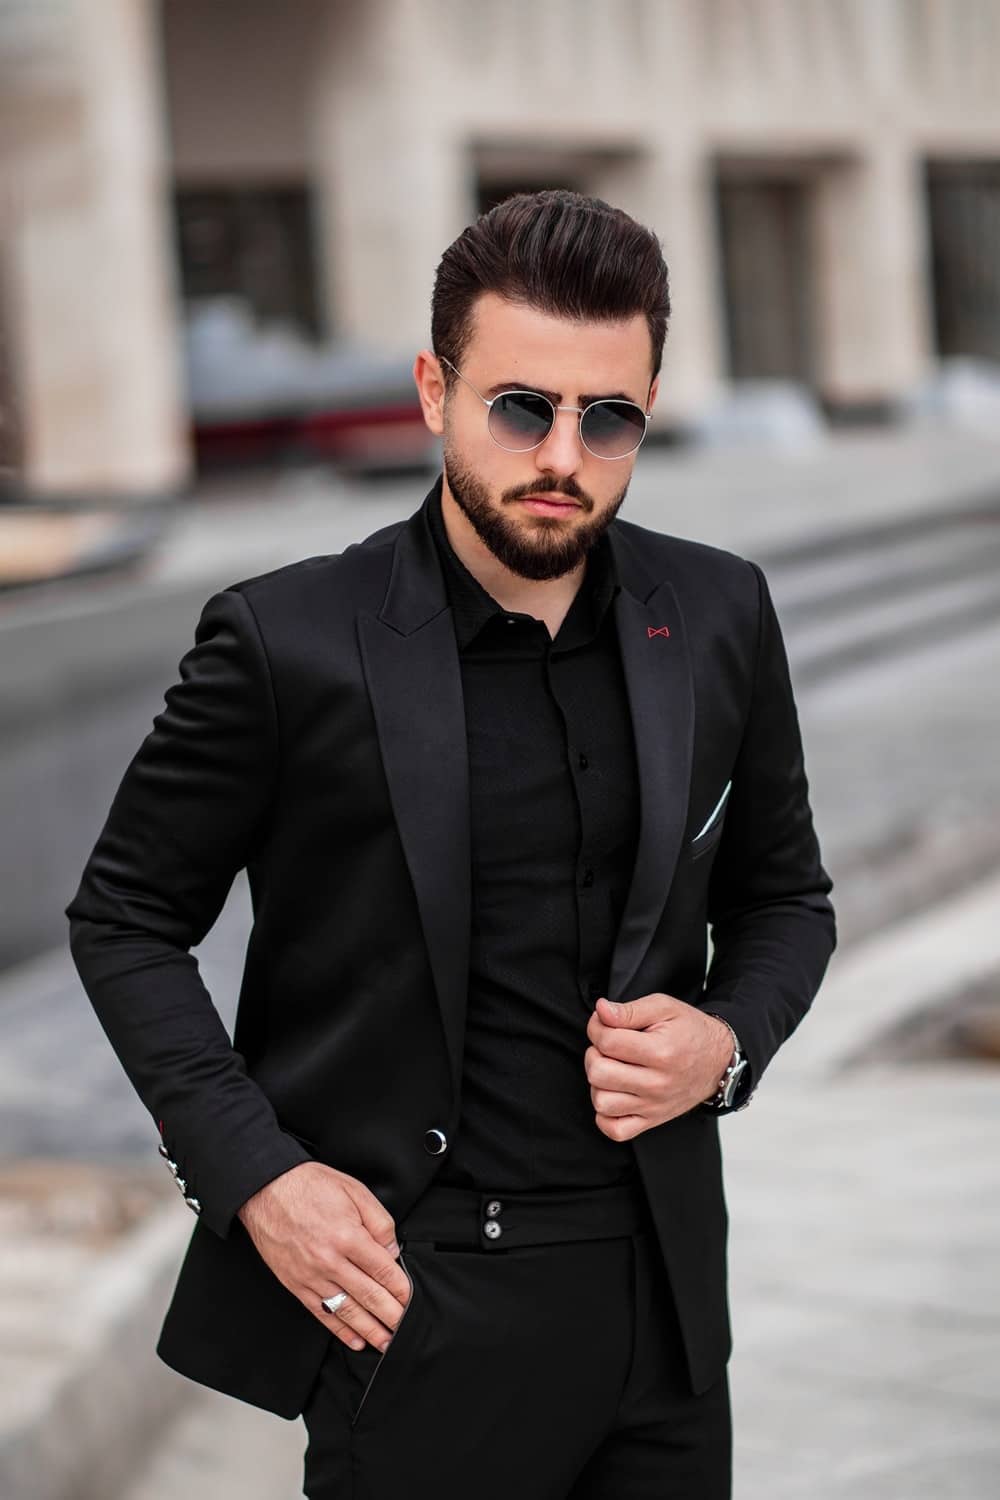 2022 Outfit Trends for Men - 20 Best Outfit Ideas to Follow